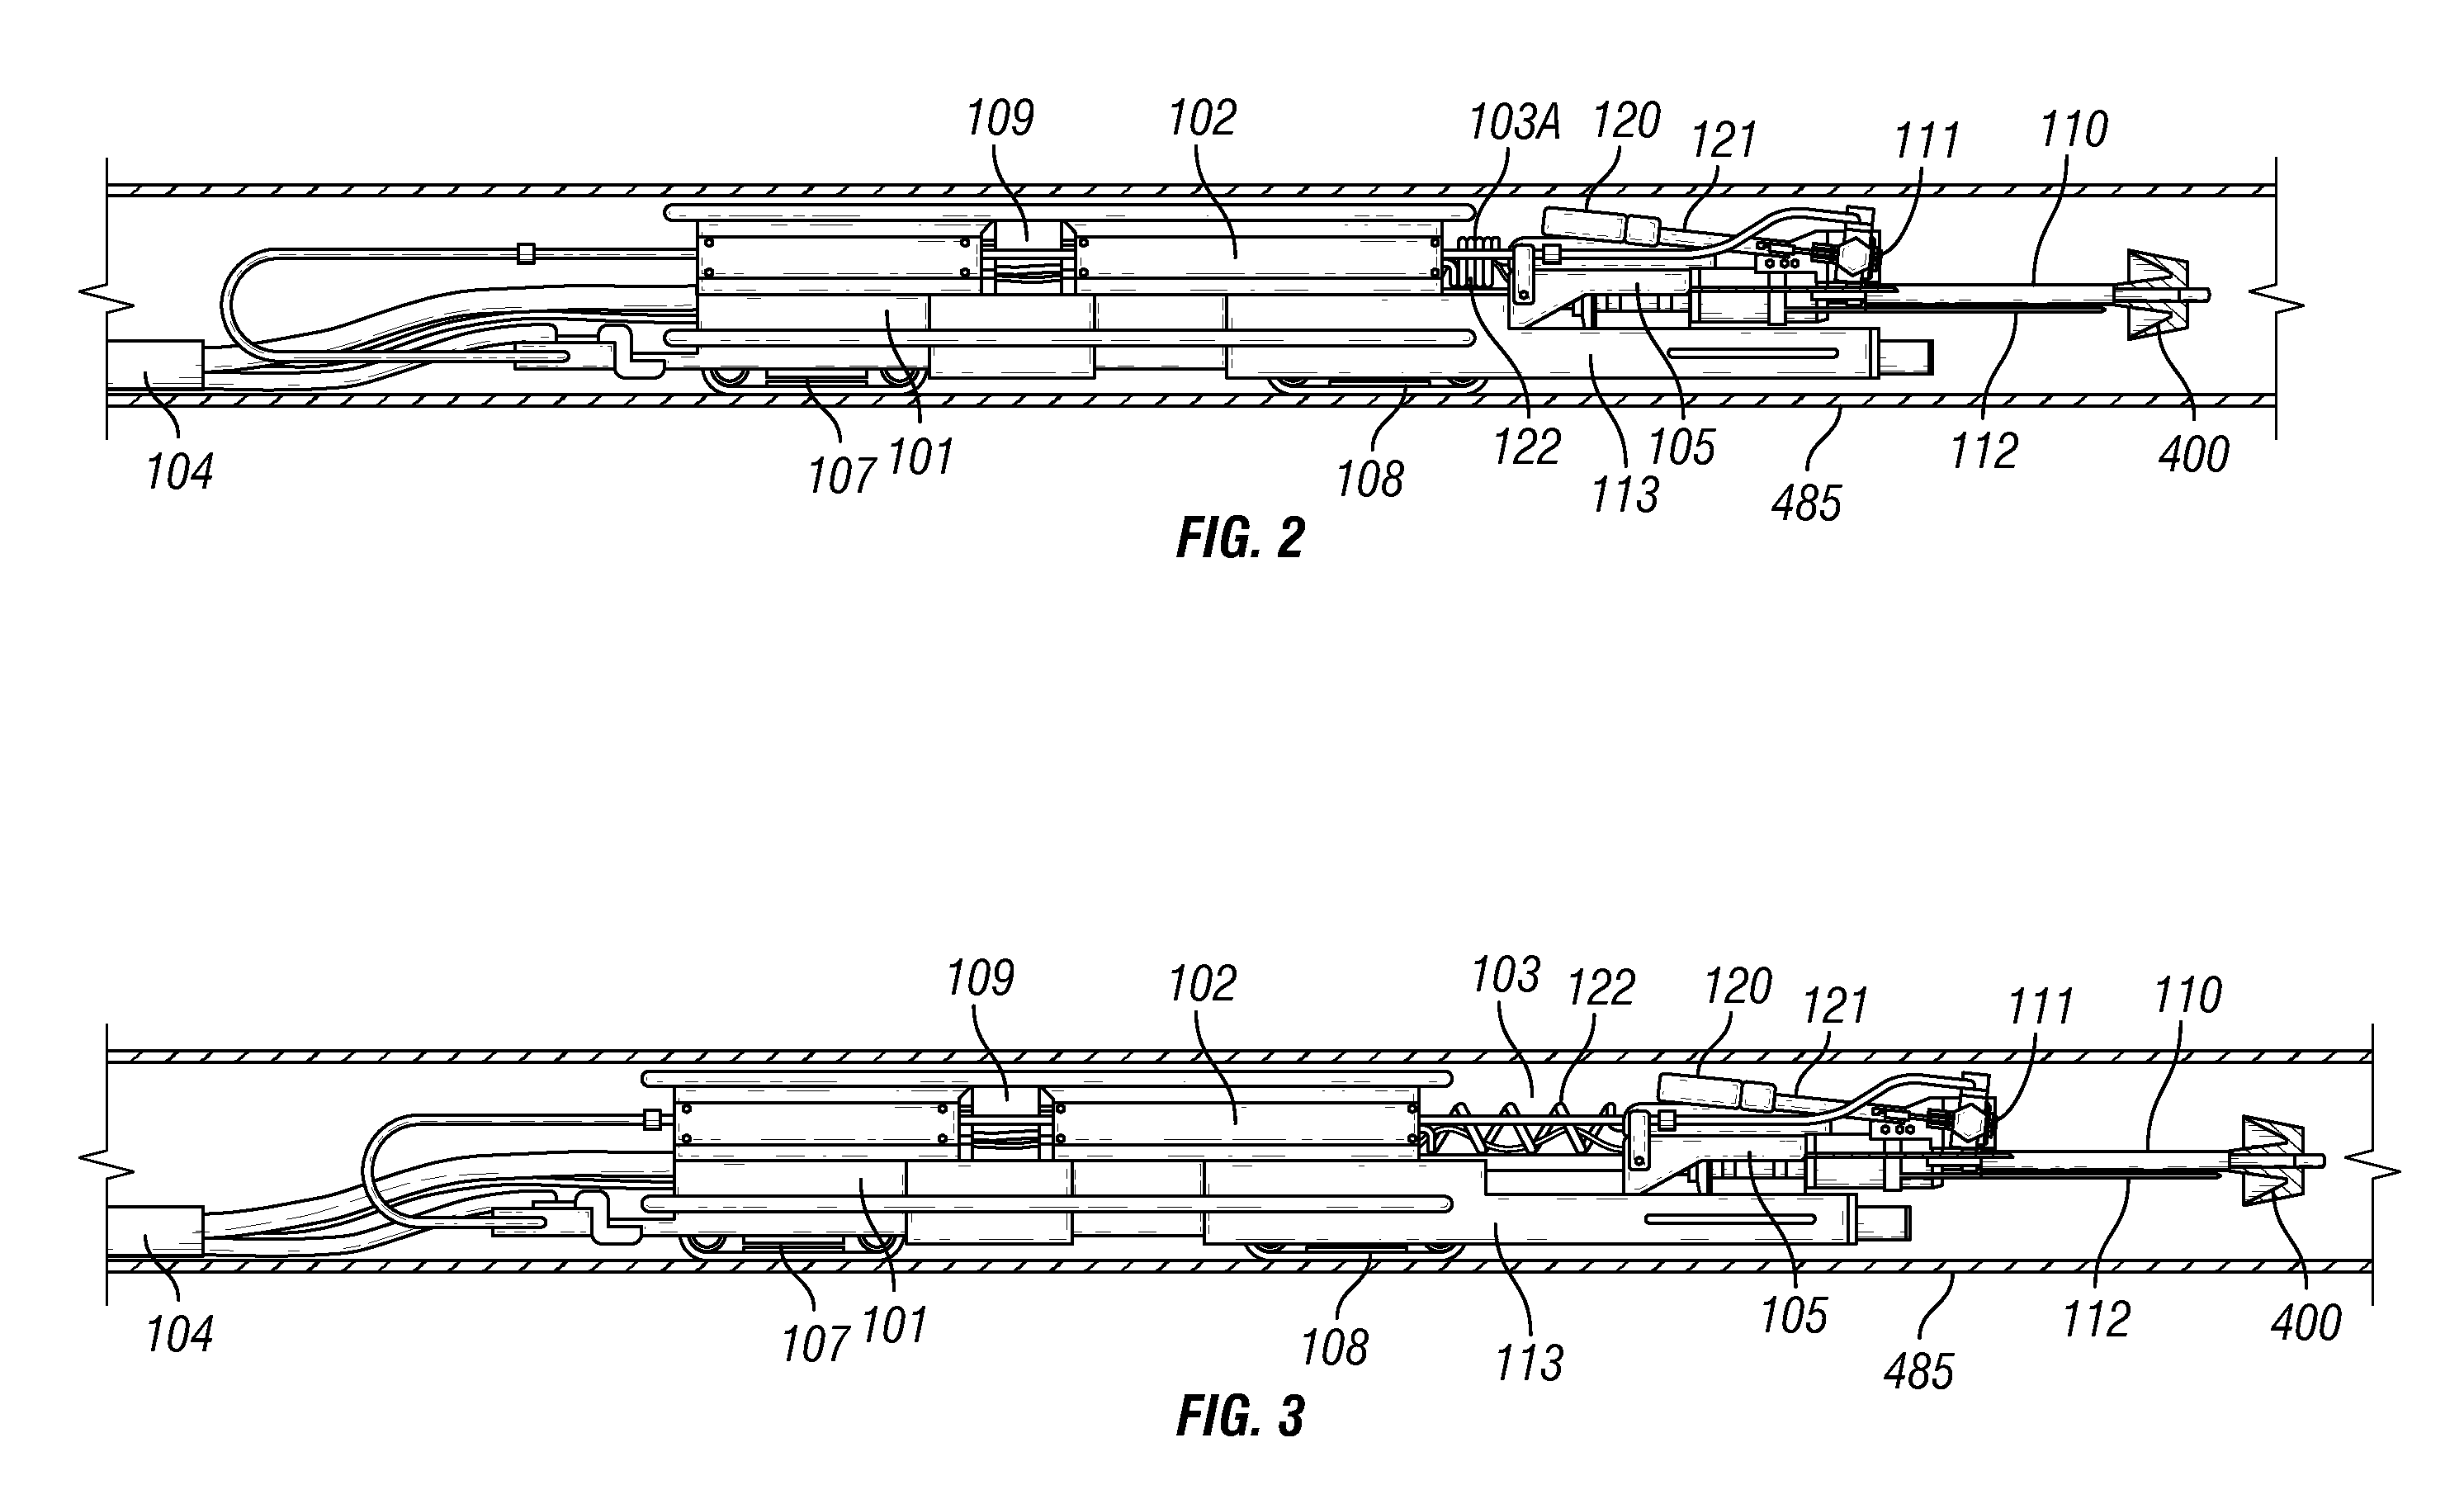 Method and apparatus for lining pipes with isocyanate and hydroxyl-amine resin based on castrol or soy oil